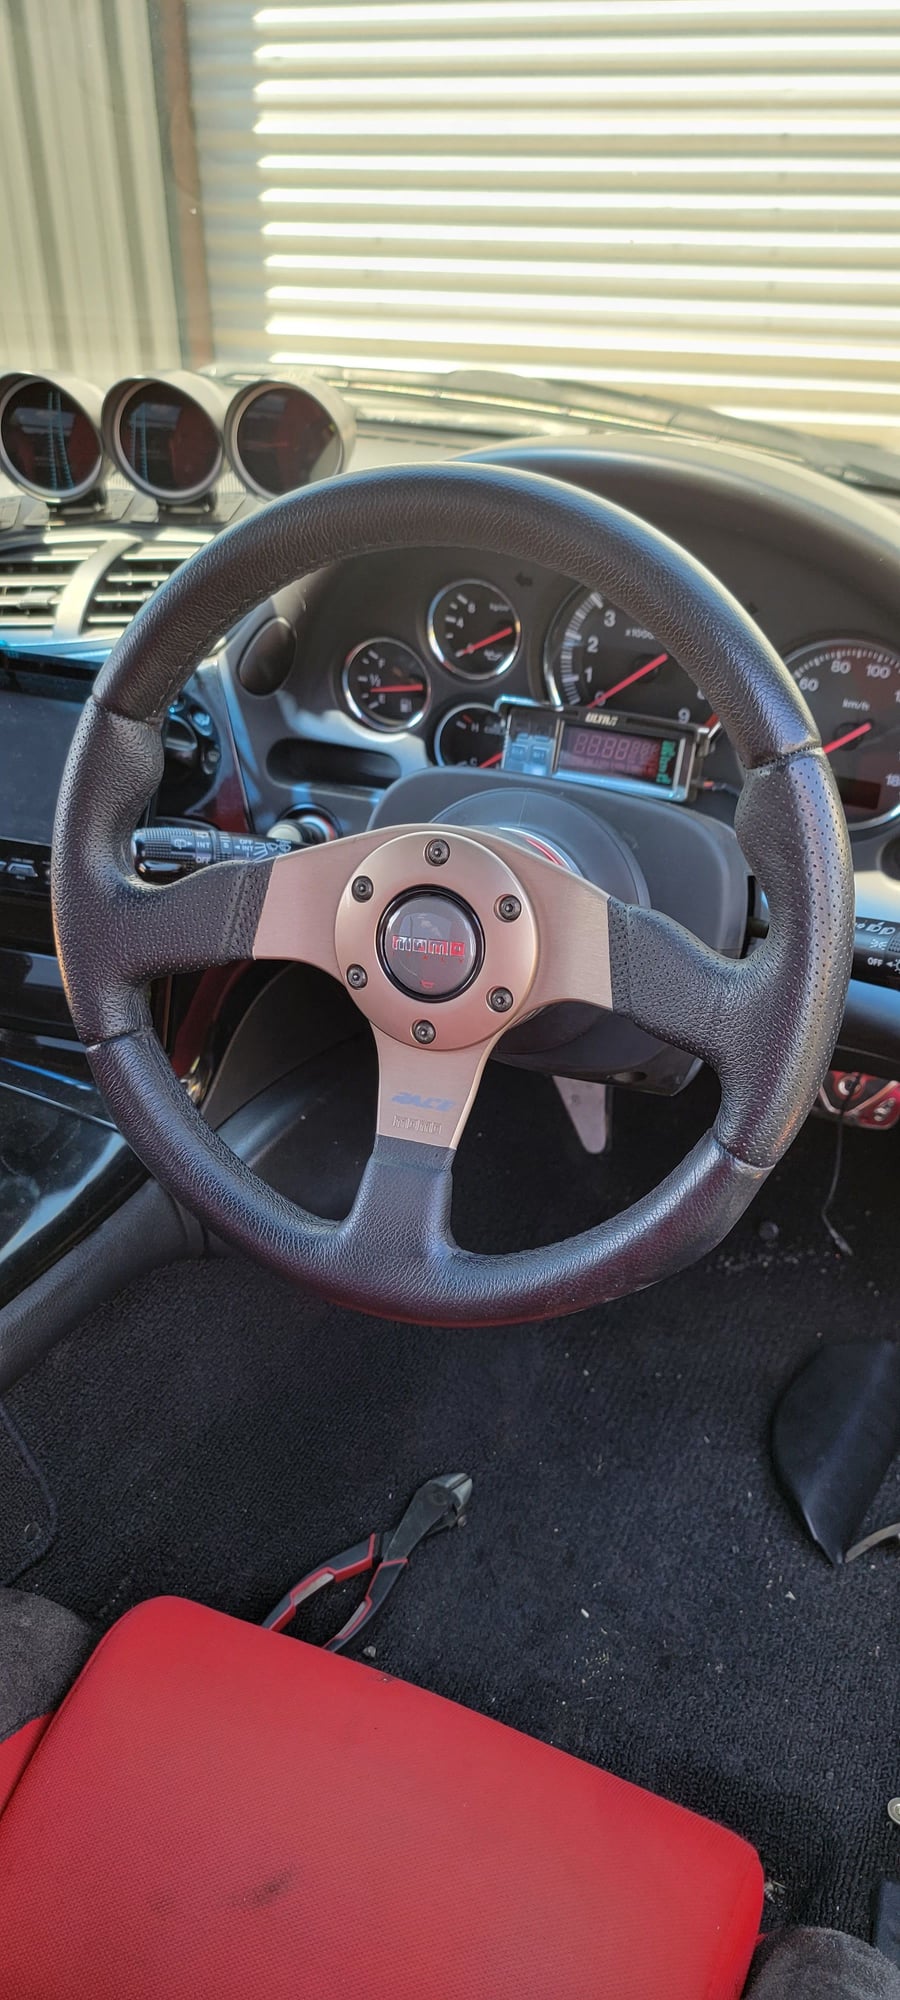 Accessories - Aftermarket parts for sale (Mazdaspeed, Knight sports, Defi, Works Bell, etc) - Used - 1993 to 2002 Mazda RX-7 - Burleson, TX 76028, United States